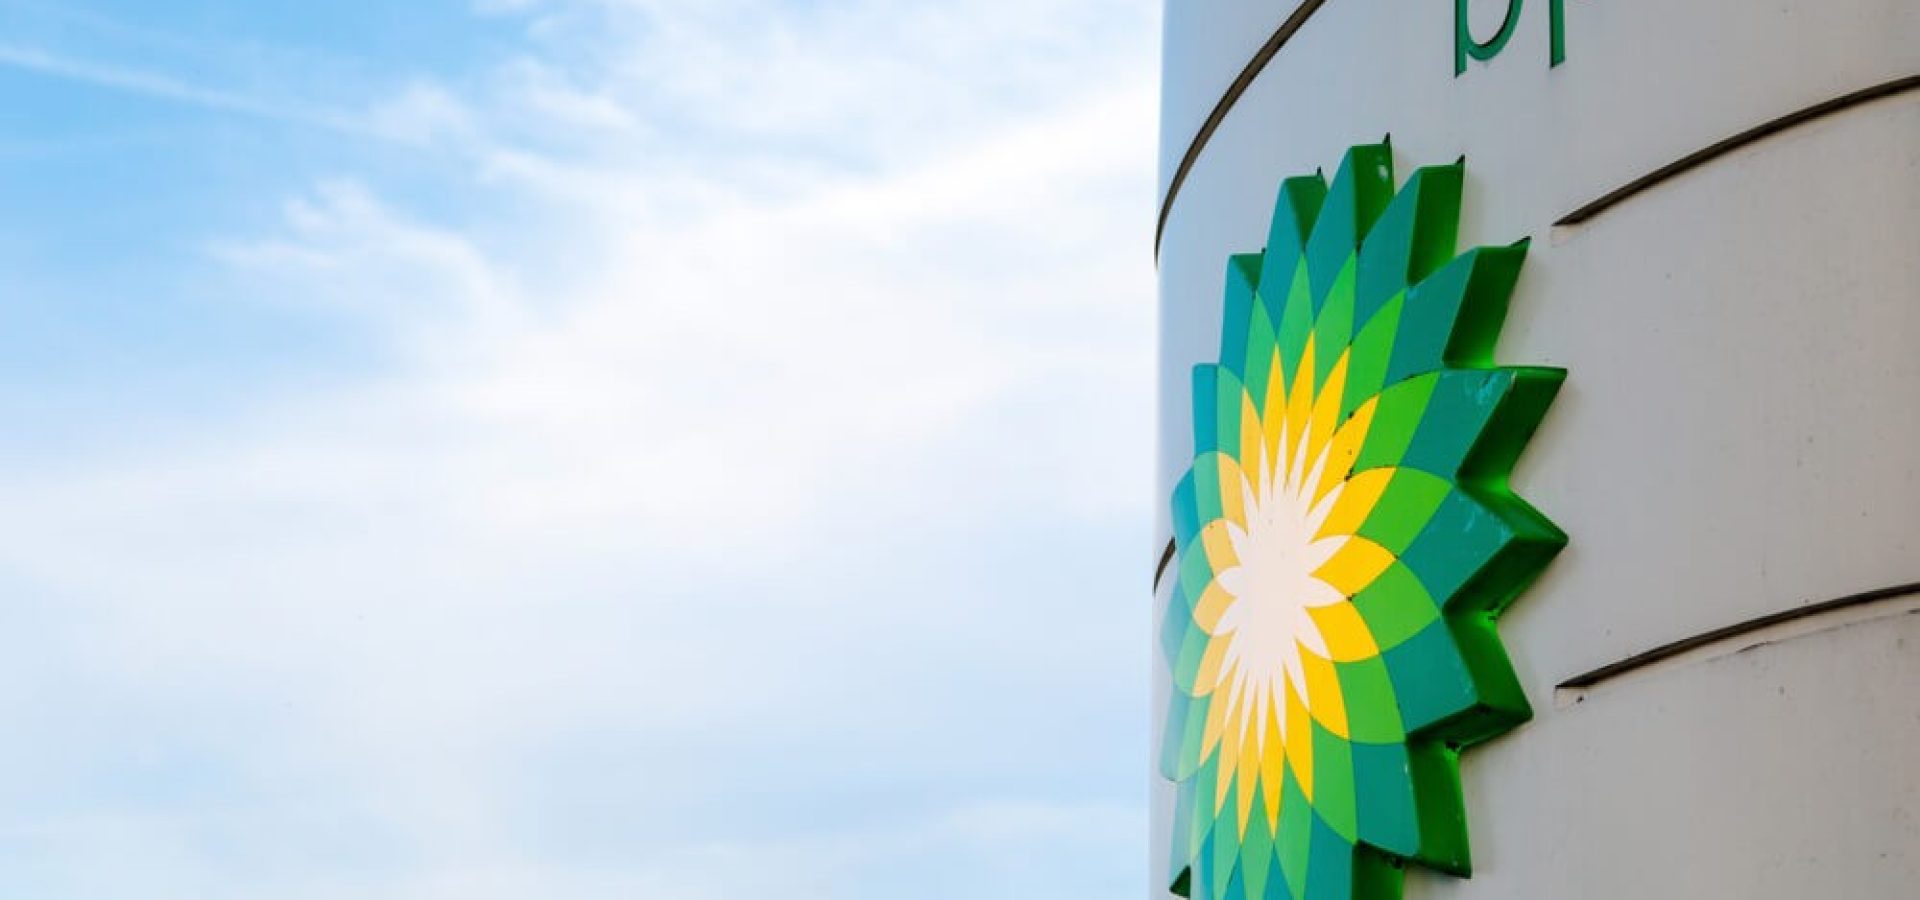 BP: BP display stand with company redesign logo in blue sky background.